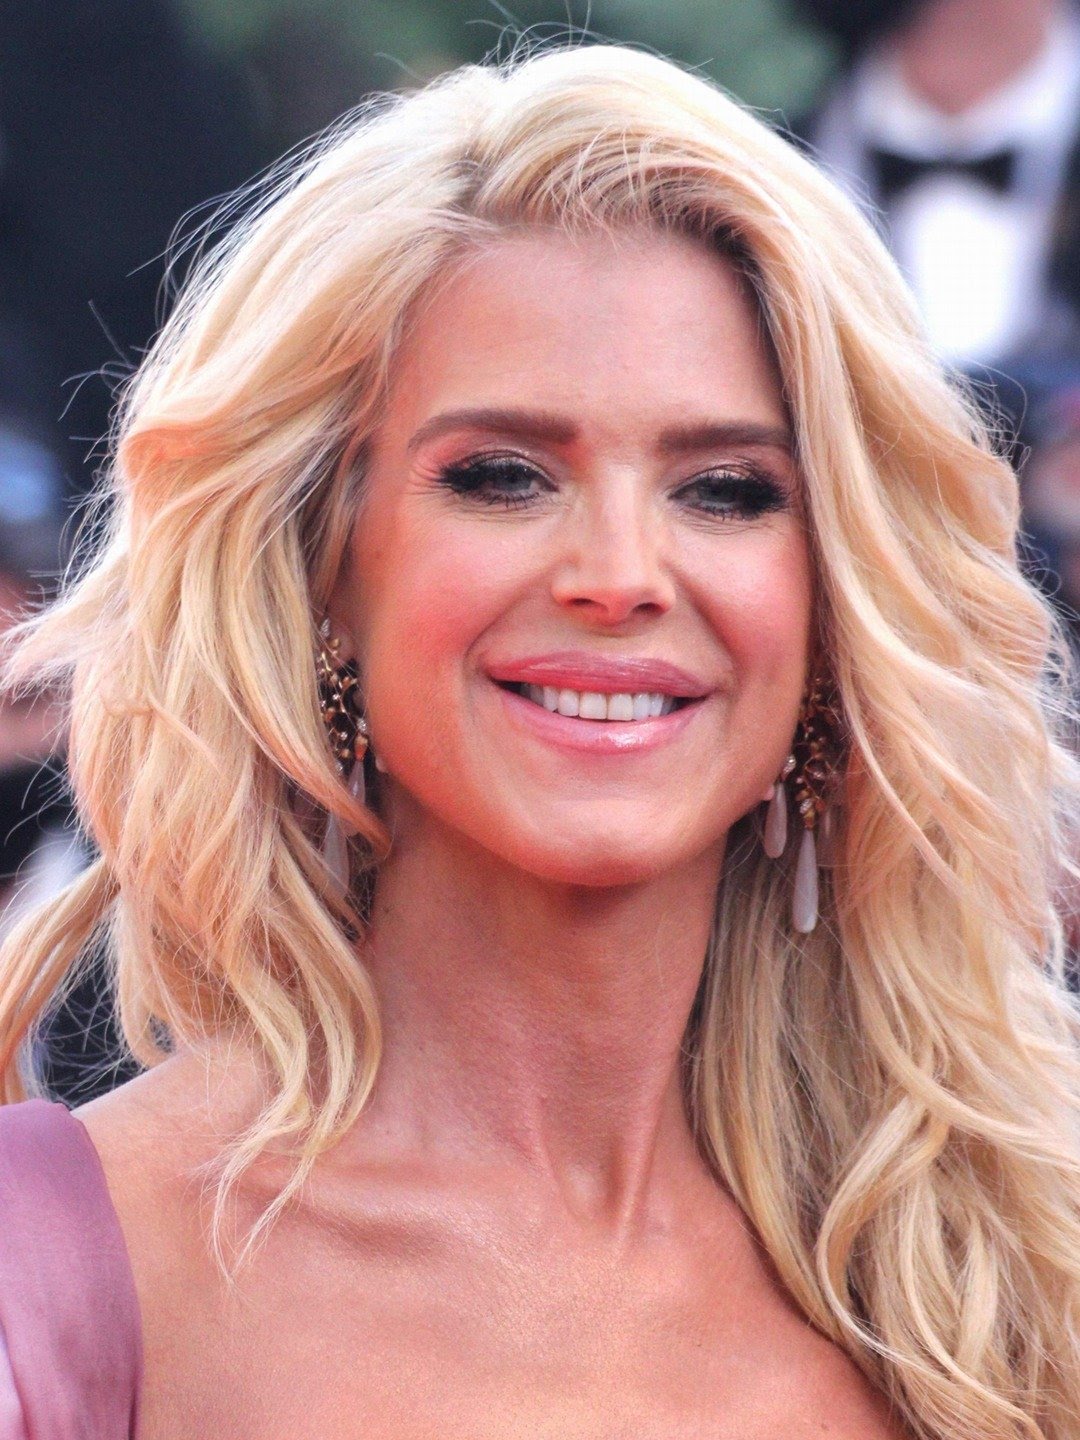 Victoria Silvstedt Swedish Model, Actress, Singer, Television Personality